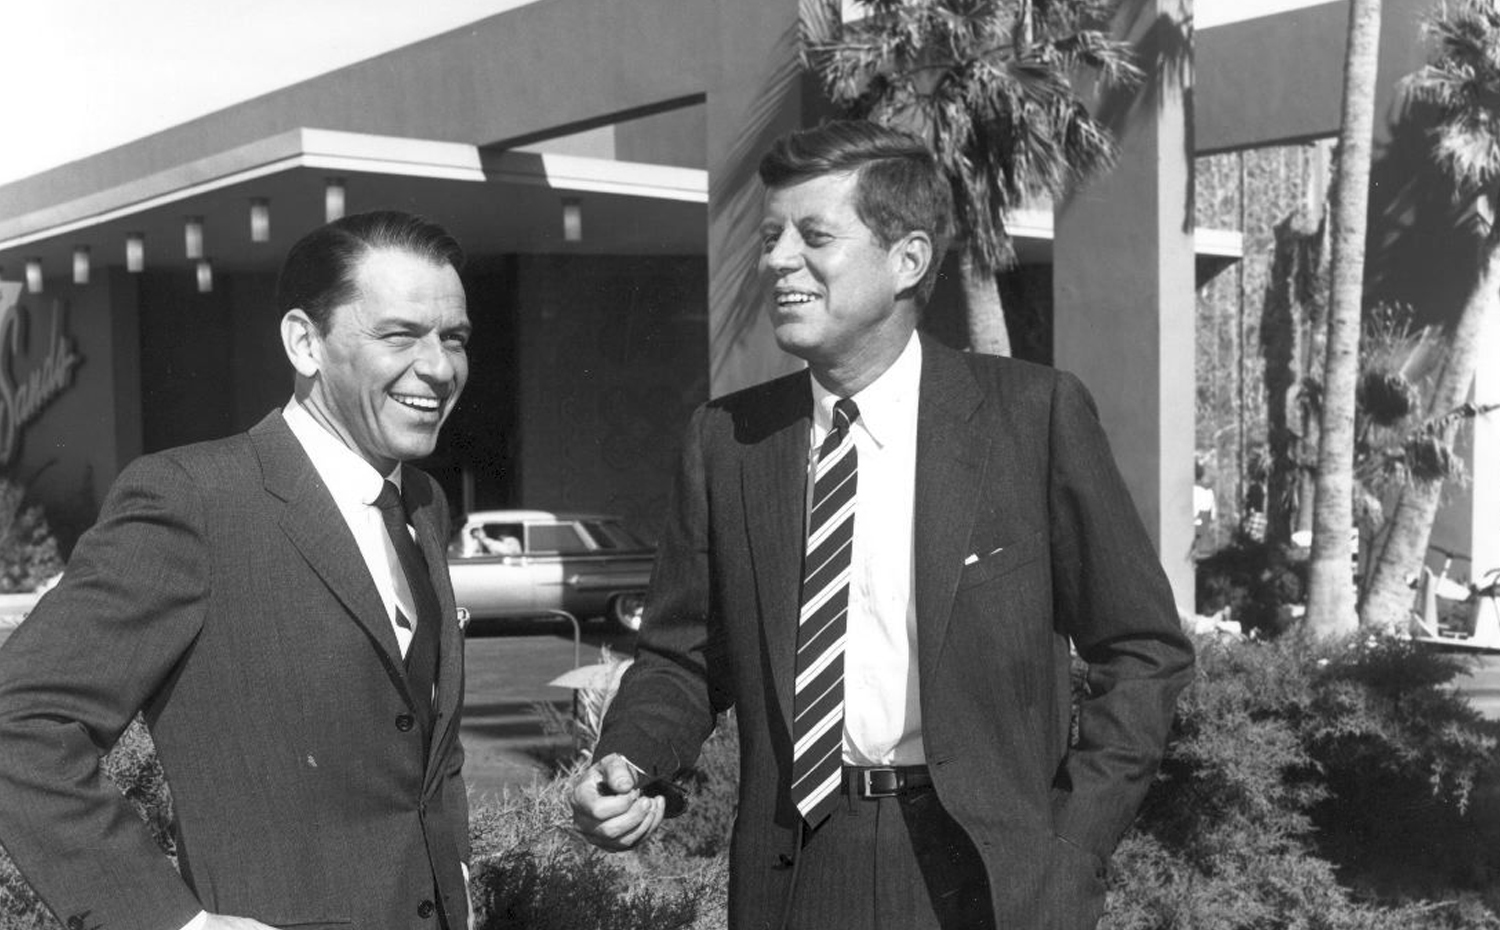 Sinatra invited Kennedy… until plans changed.